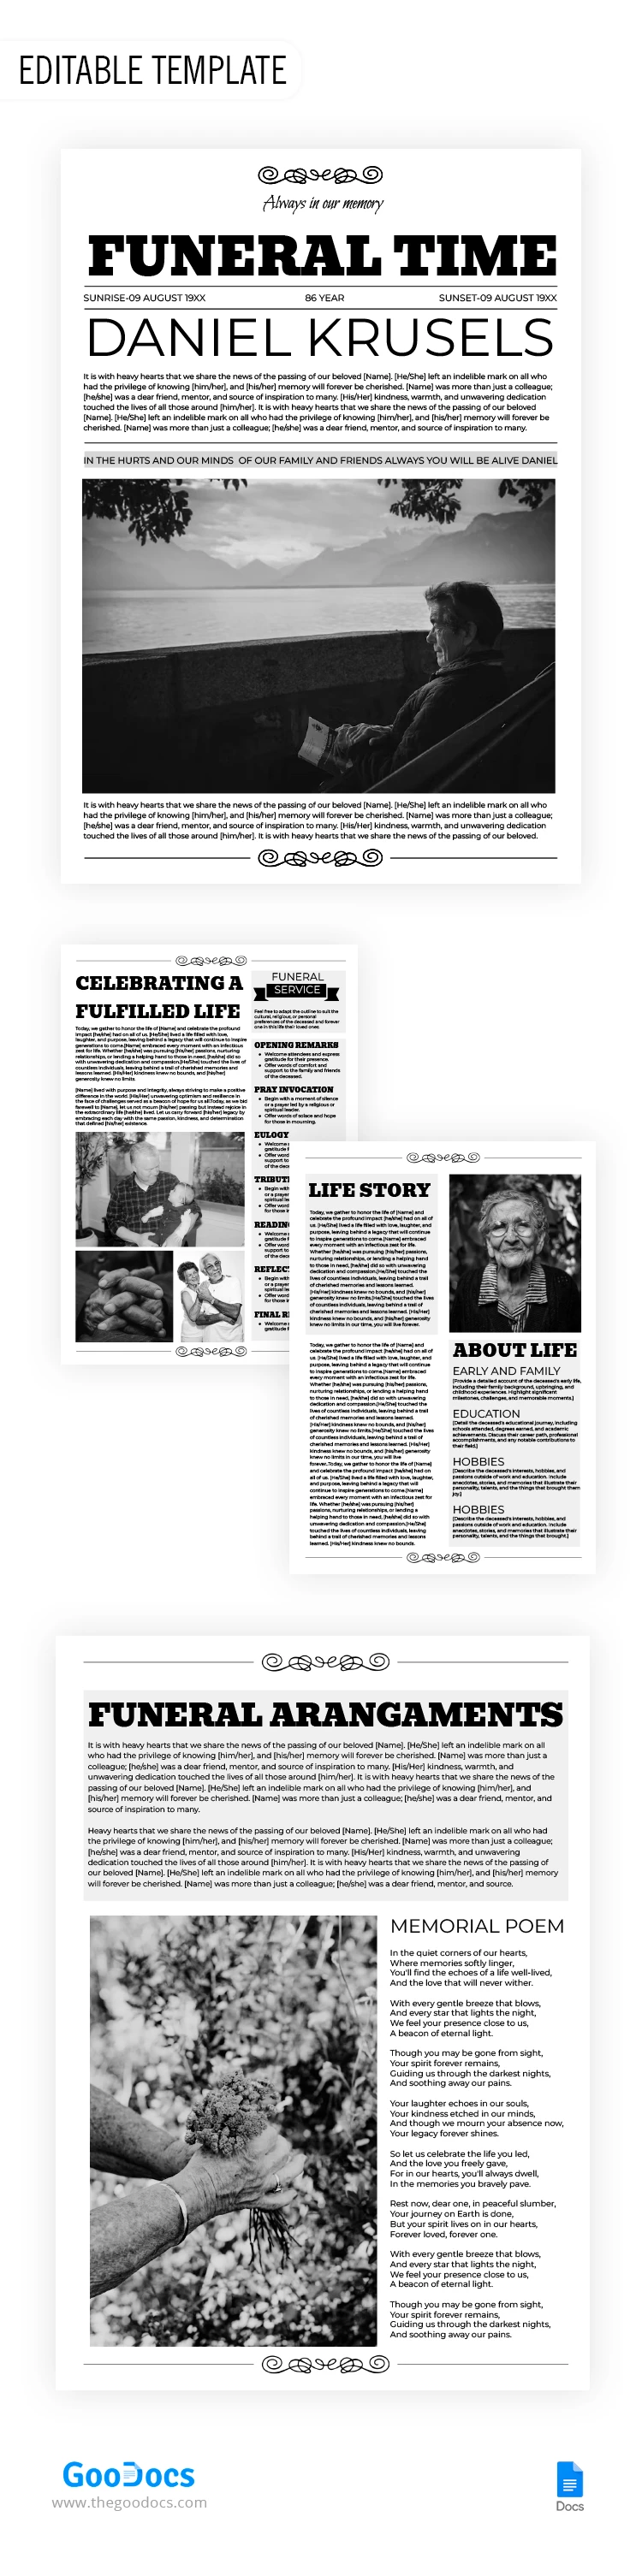 Funeral Time Newspaper - free Google Docs Template - 10068633